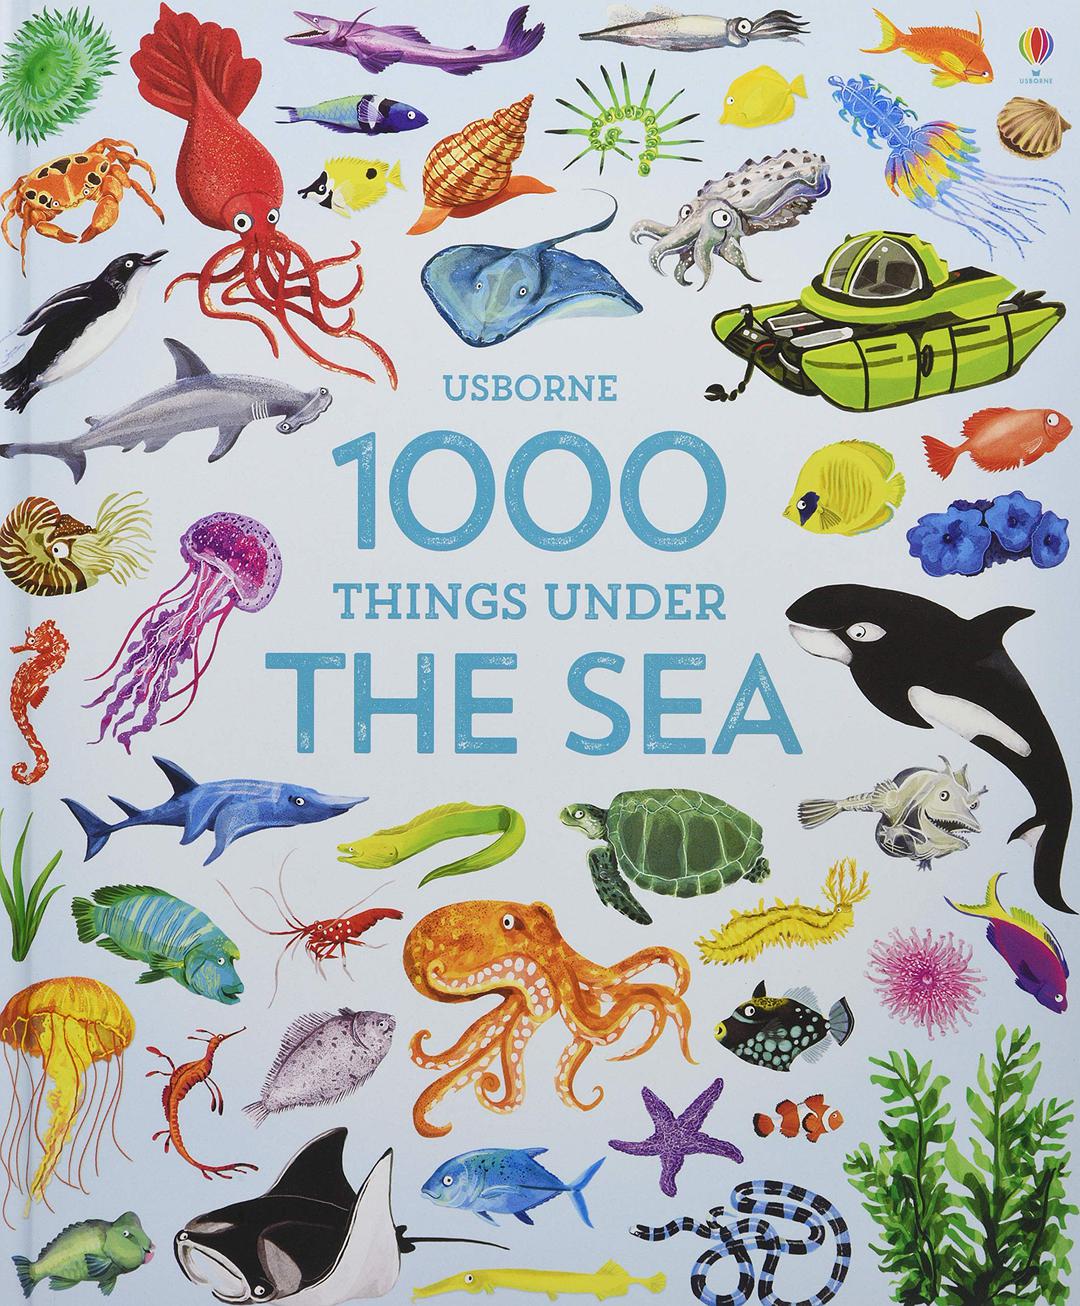 1000 things under the sea /